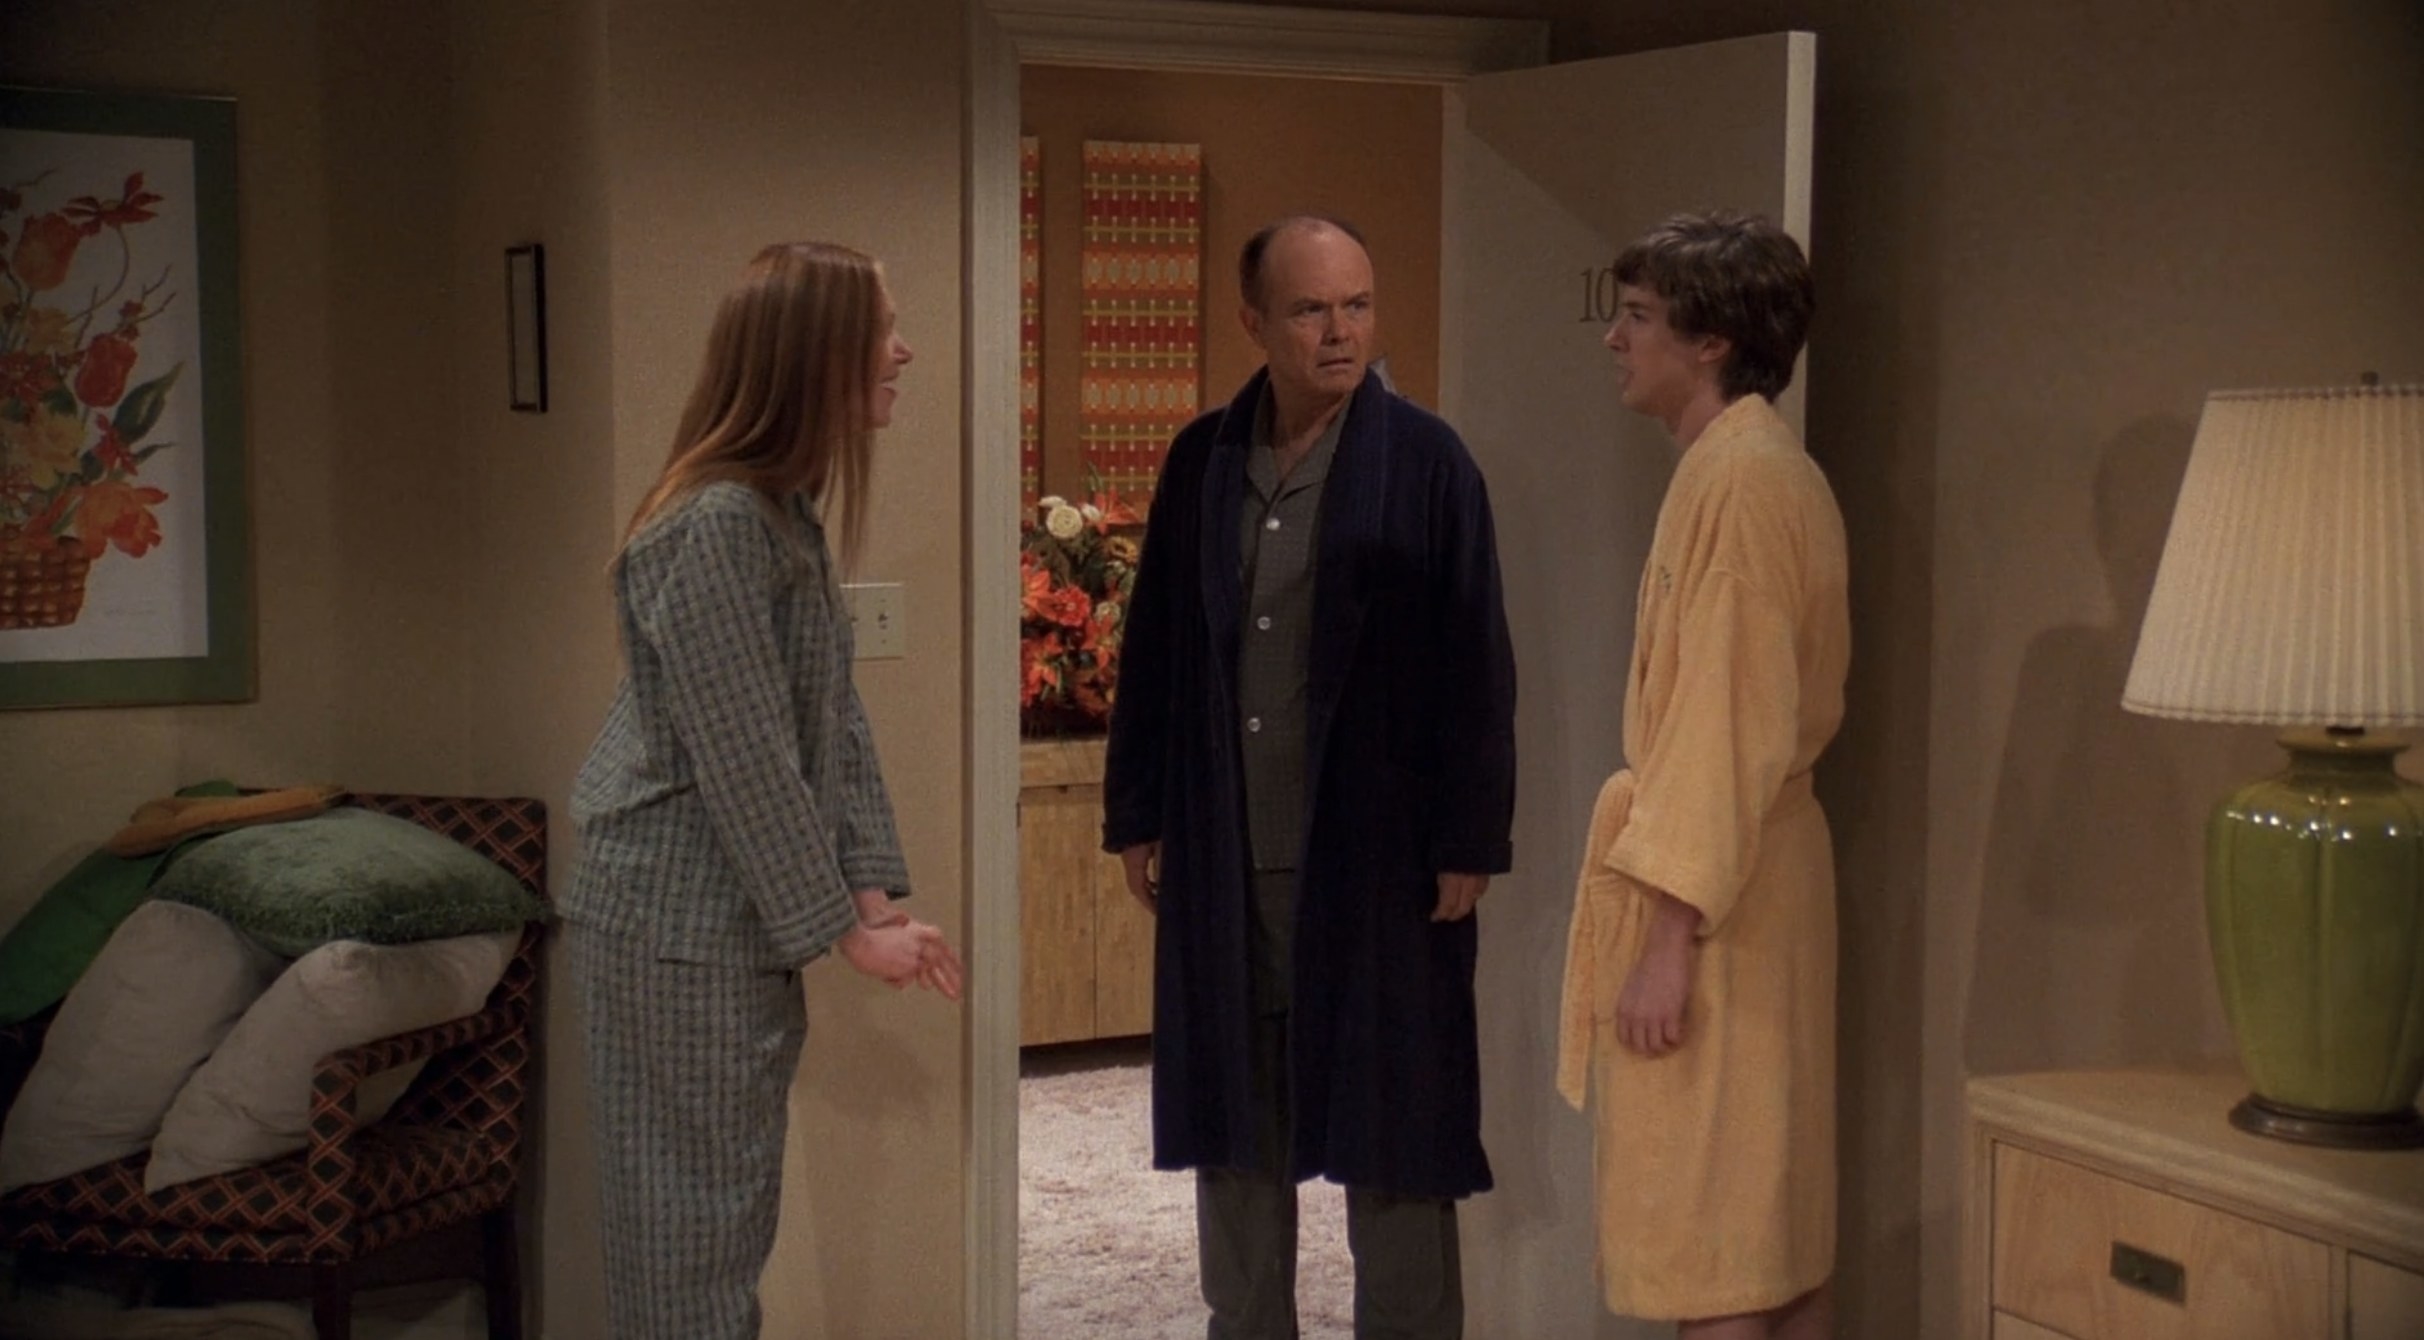 Eric and Donna stand in a robe and pajamas, while Red looks at them disapprovingly